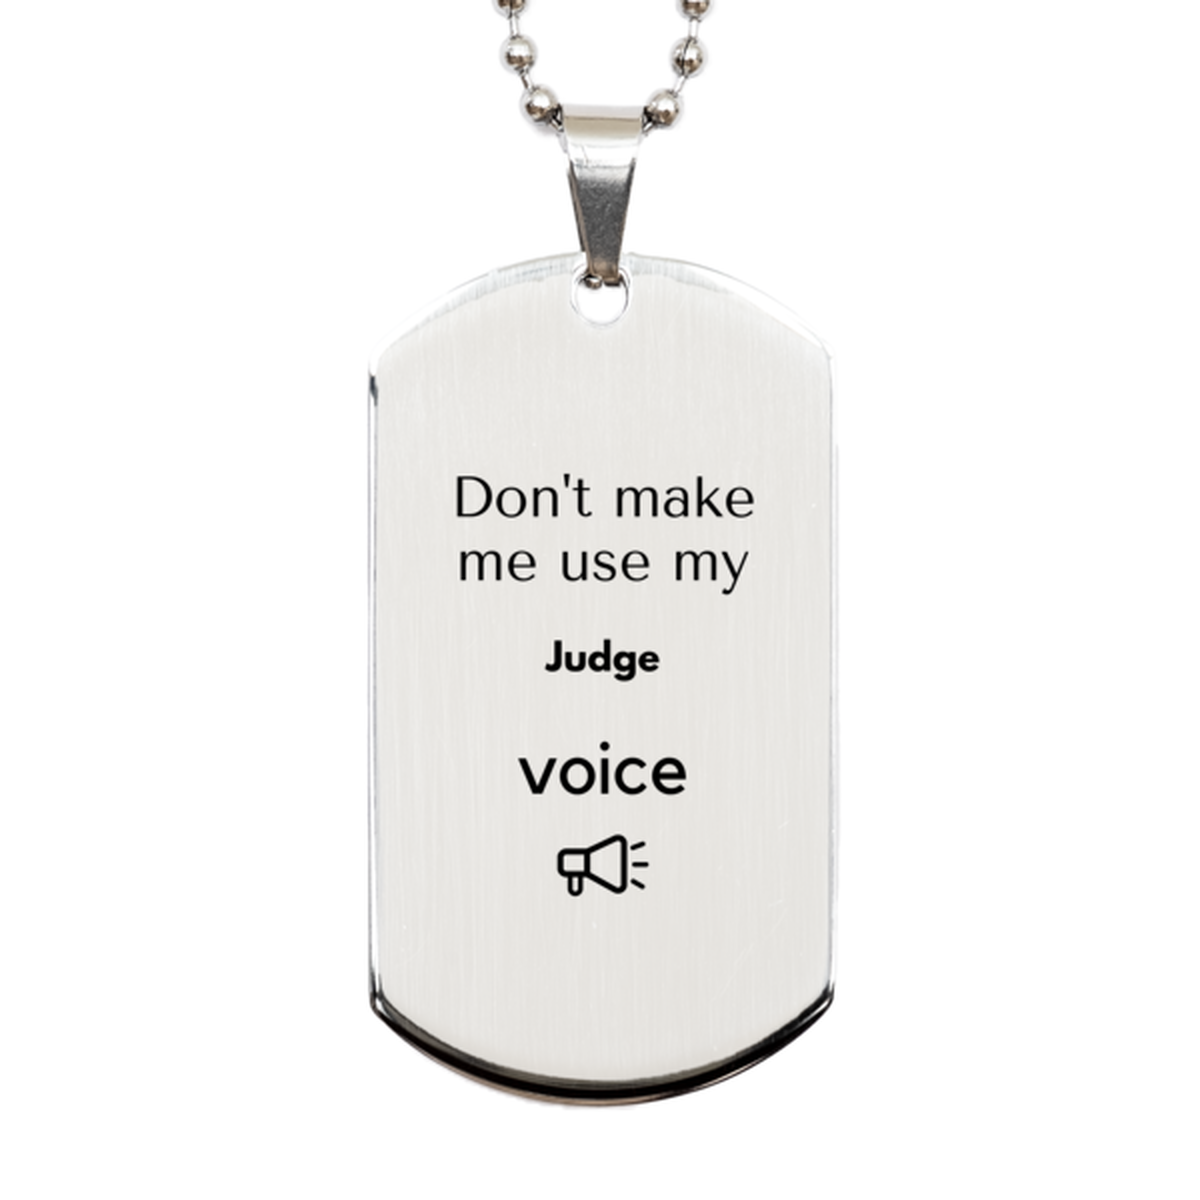 Don't make me use my Judge voice, Sarcasm Judge Gifts, Christmas Judge Silver Dog Tag Birthday Unique Gifts For Judge Coworkers, Men, Women, Colleague, Friends